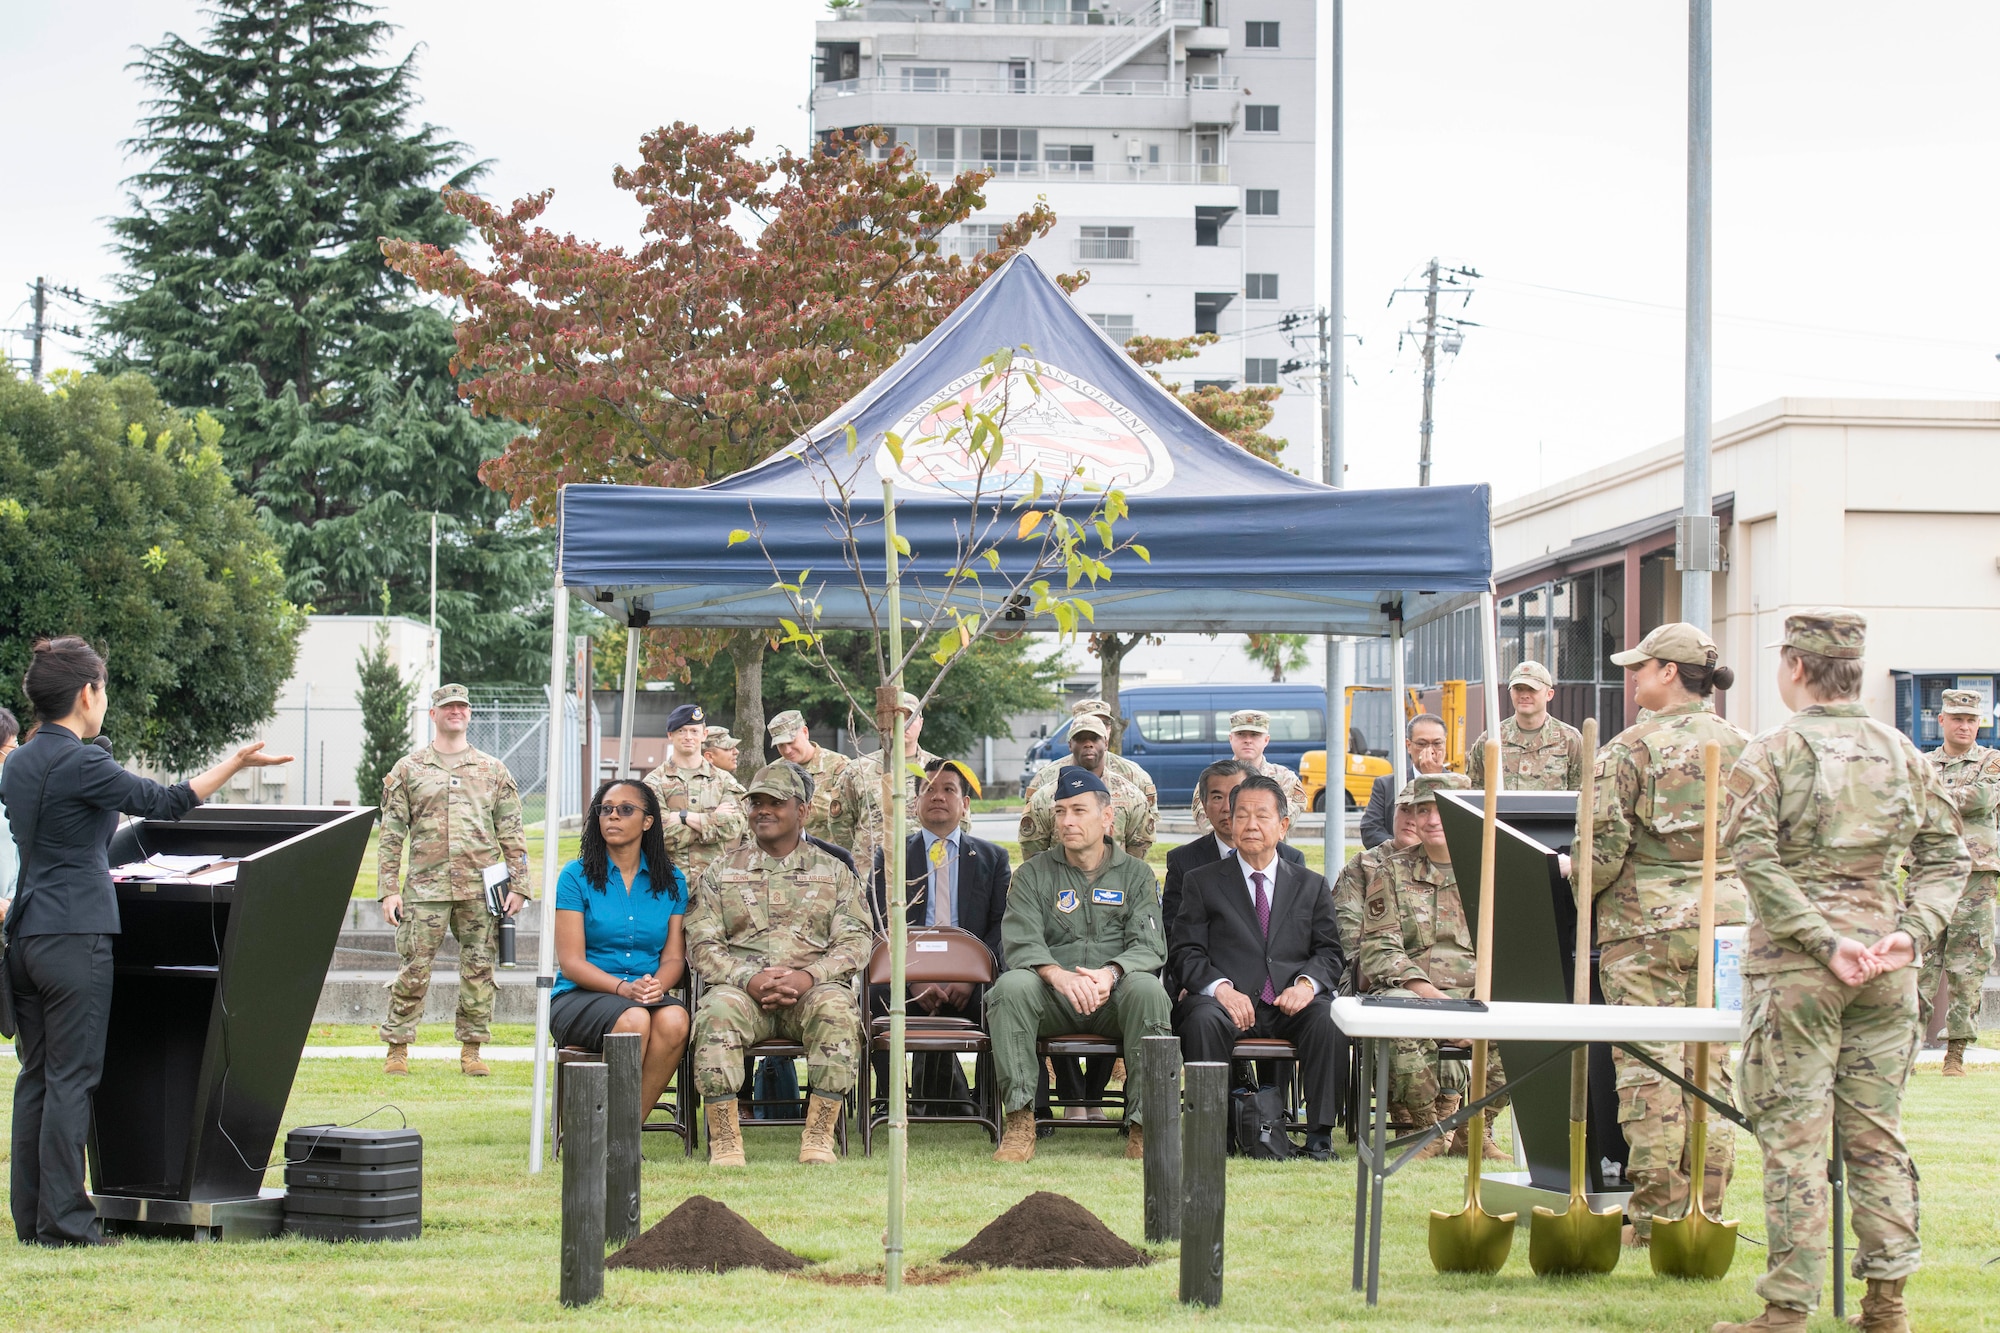 Attendees of a tree planting ceremony listen to the event’s emcees at Yokota Air Base, Japan, Oct. 5, 2022.